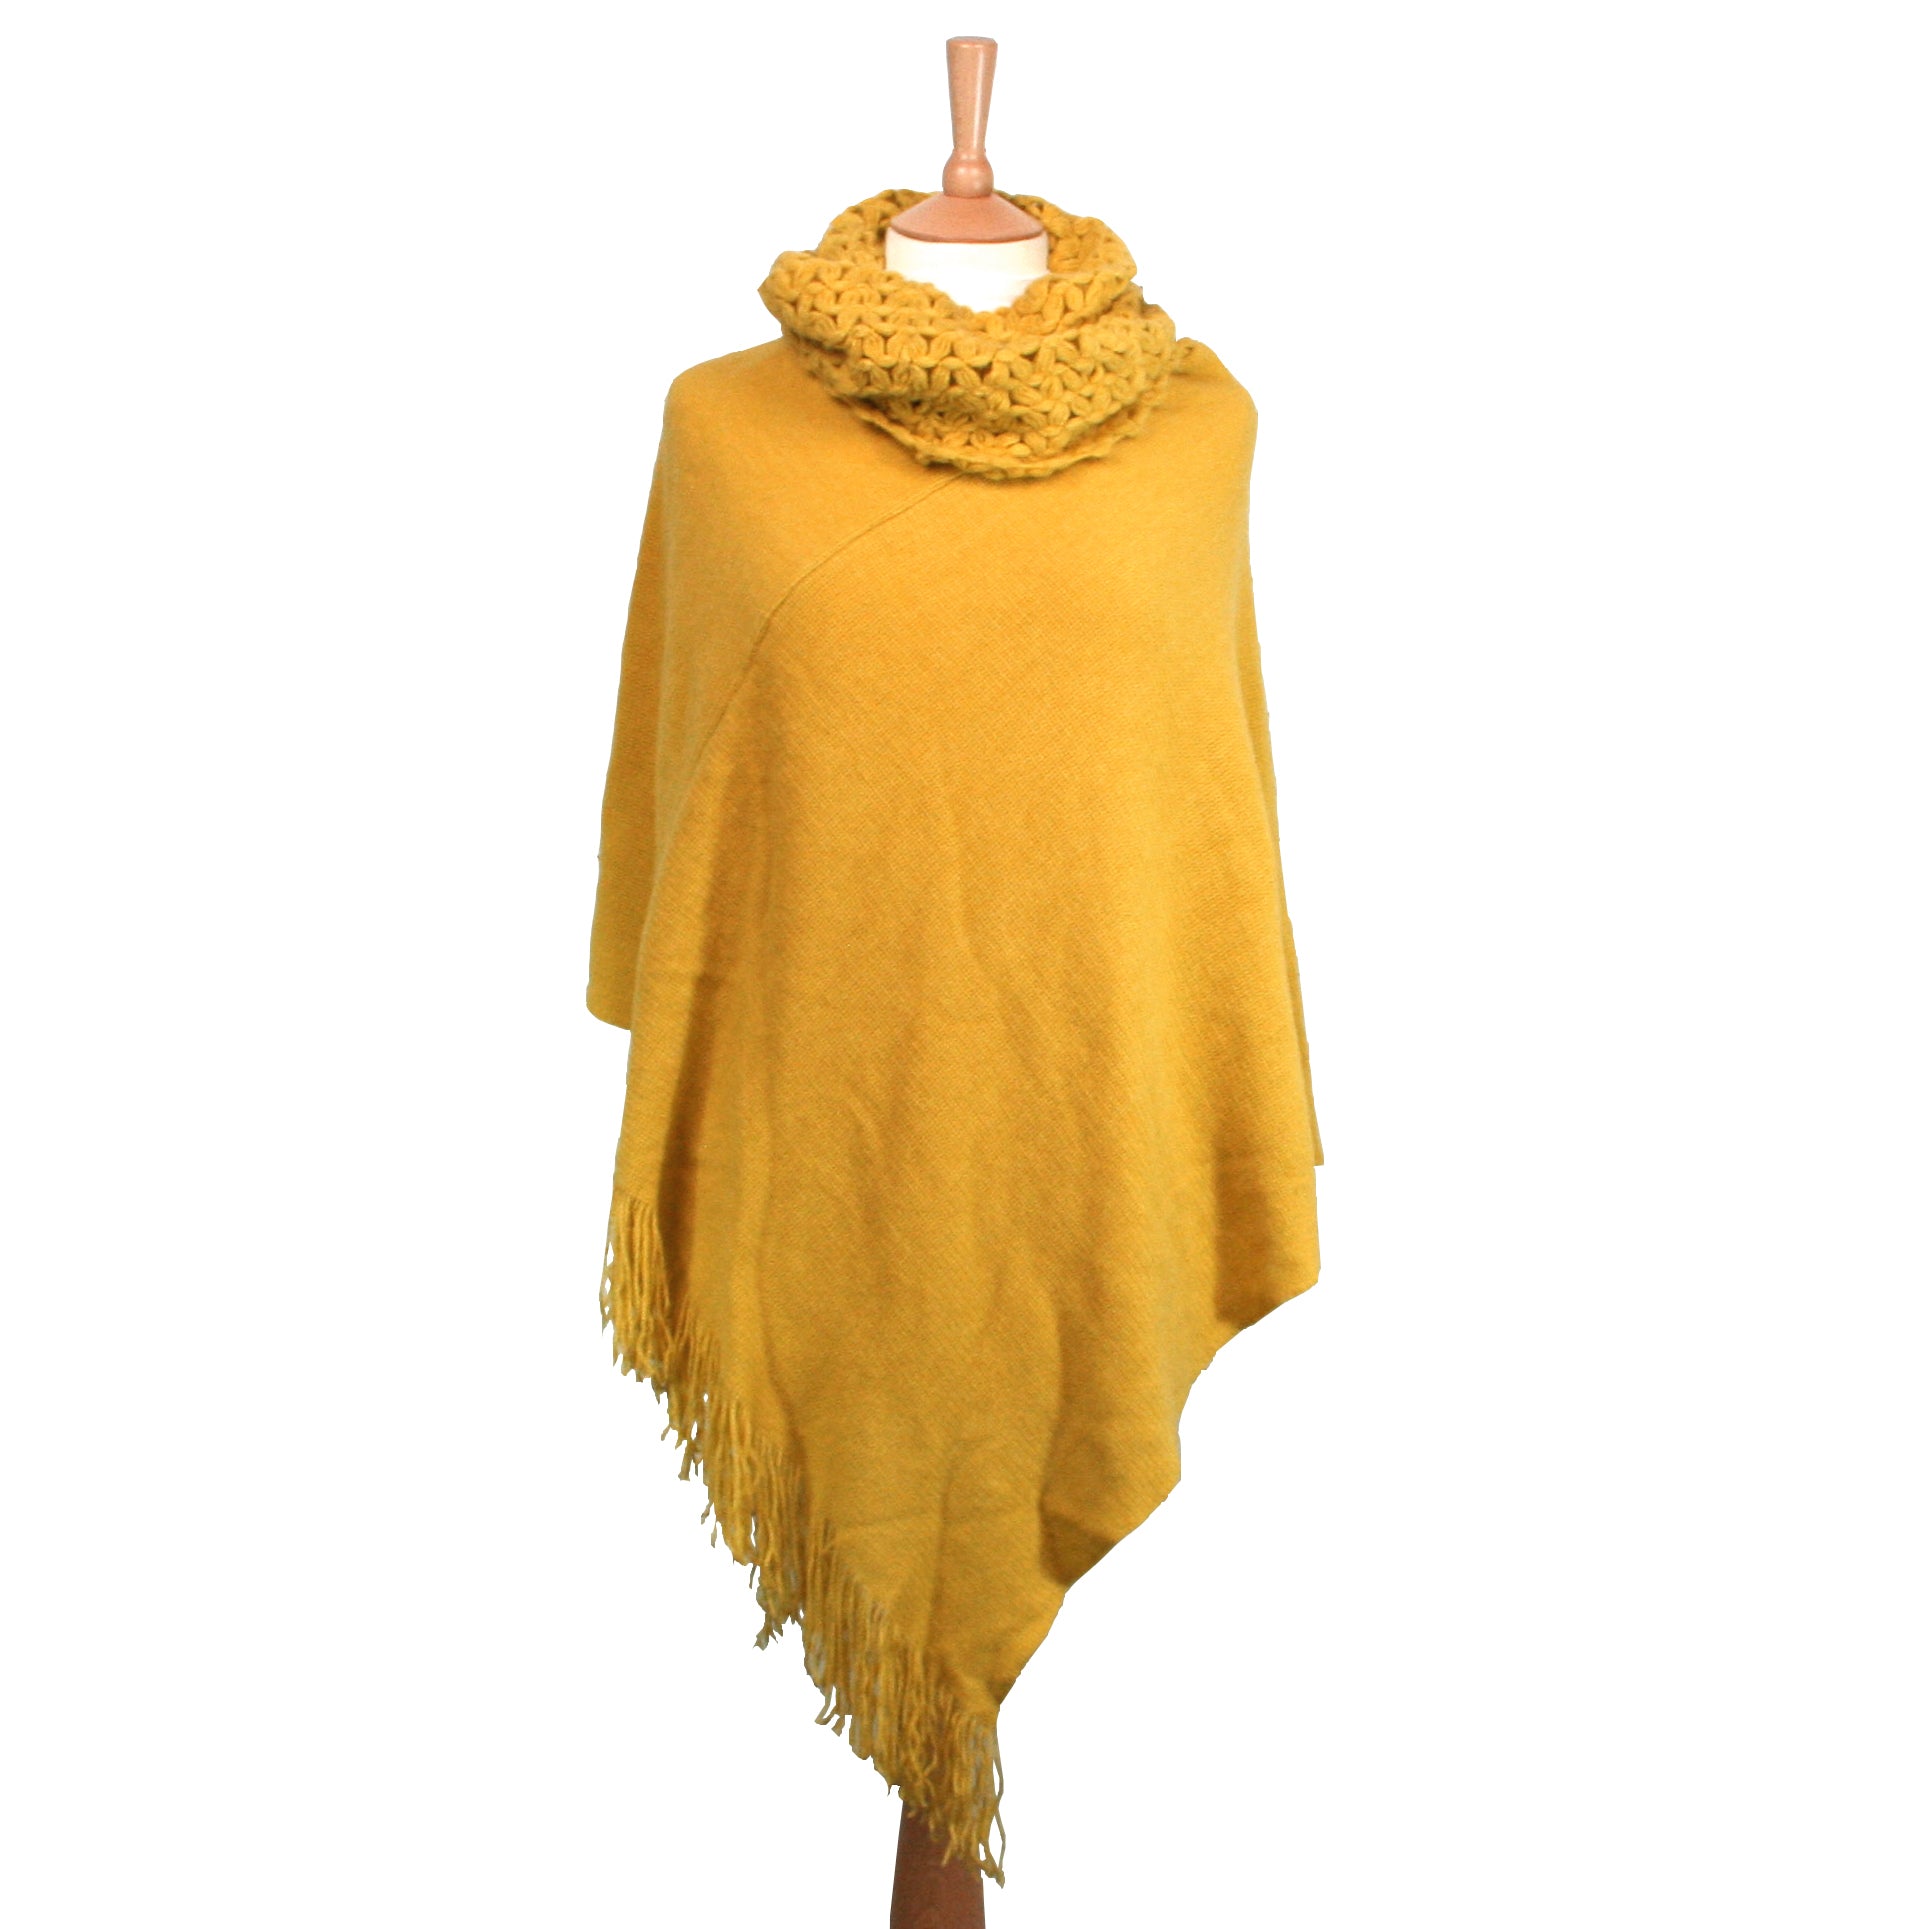 luxurious winter poncho with tassels